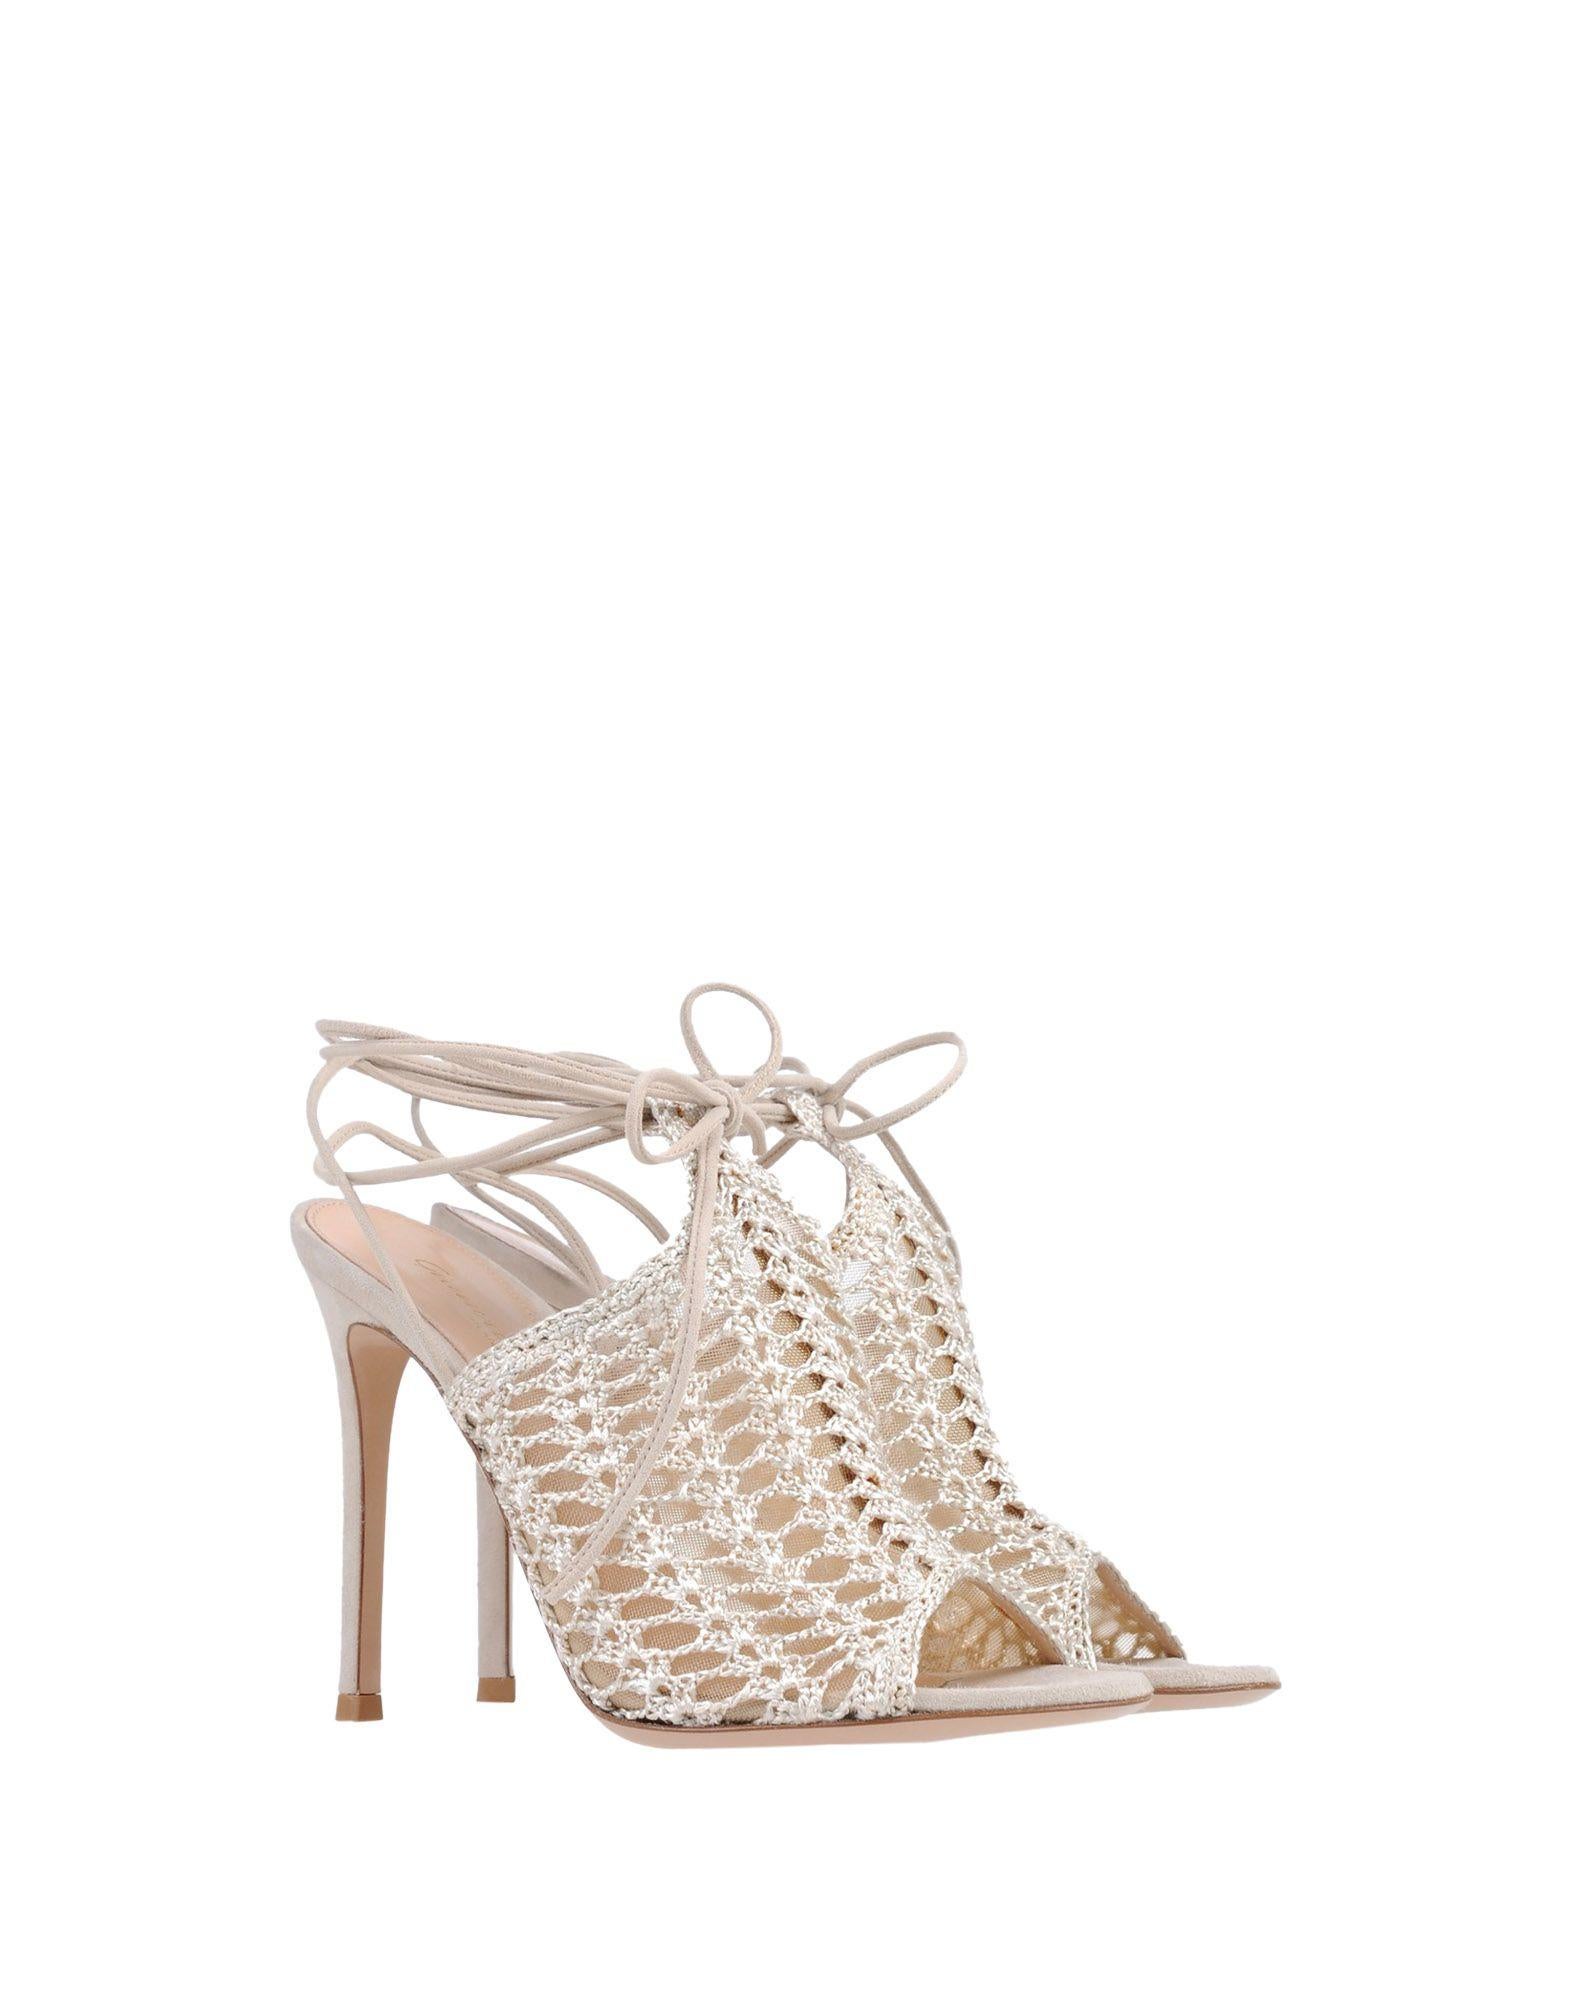 Gianvito Rossi NEW Gold Mesh Leather Strappy Ankle Evening Sandals Heels in Box

Size IT 36.5
Suede
Crochet
Ankle tie closure
Made in Italy
Heel height 4.25